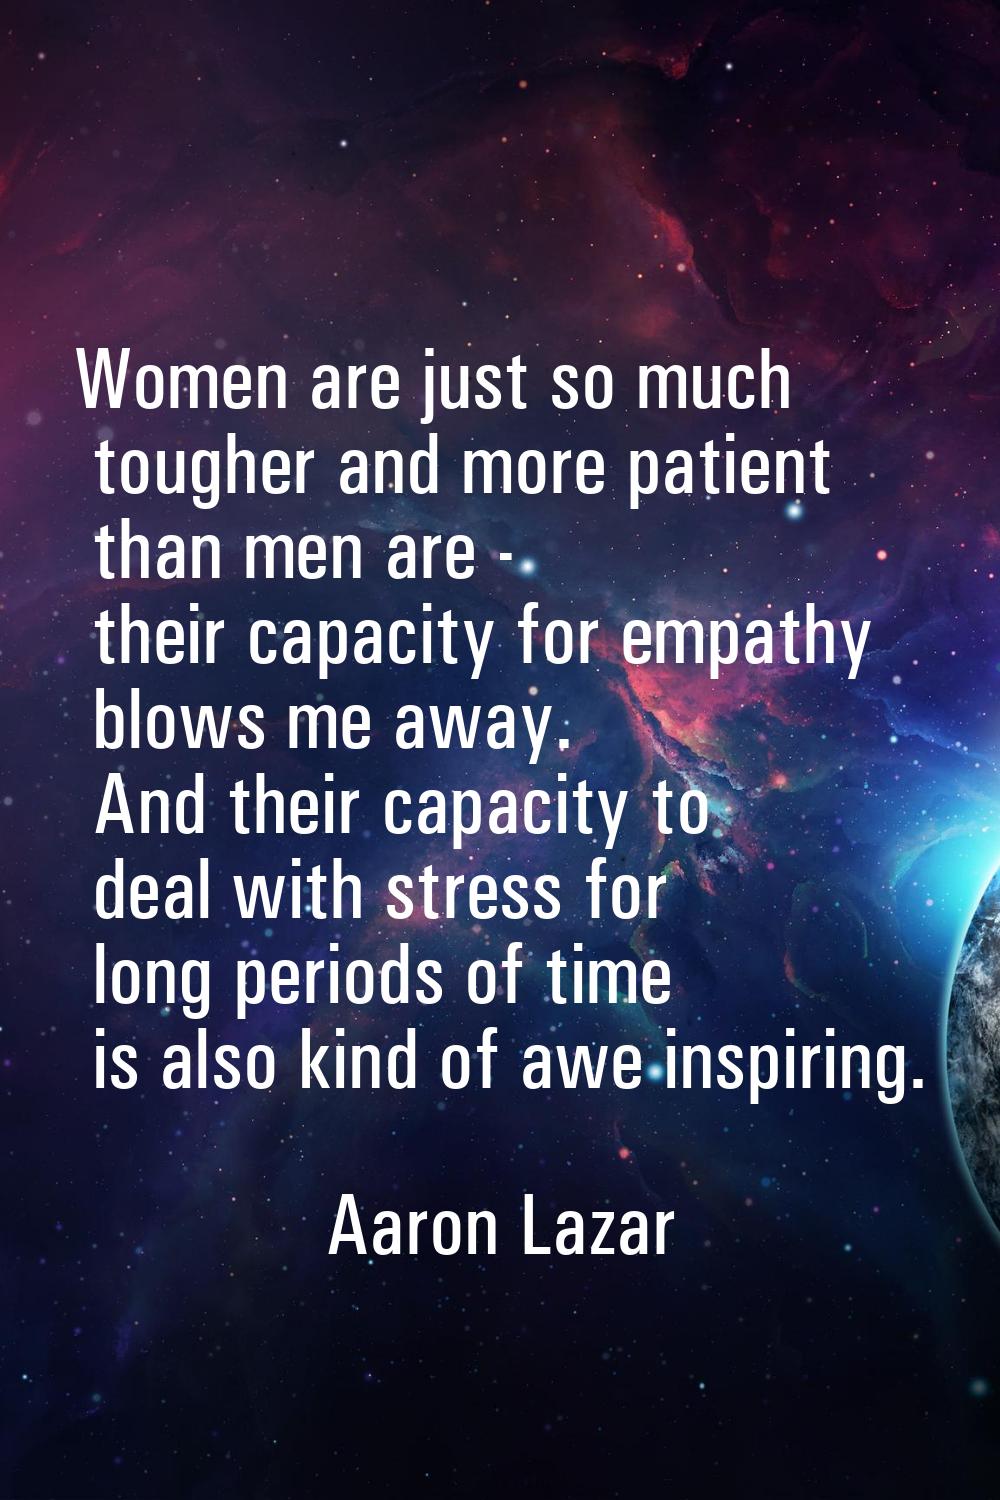 Women are just so much tougher and more patient than men are - their capacity for empathy blows me 